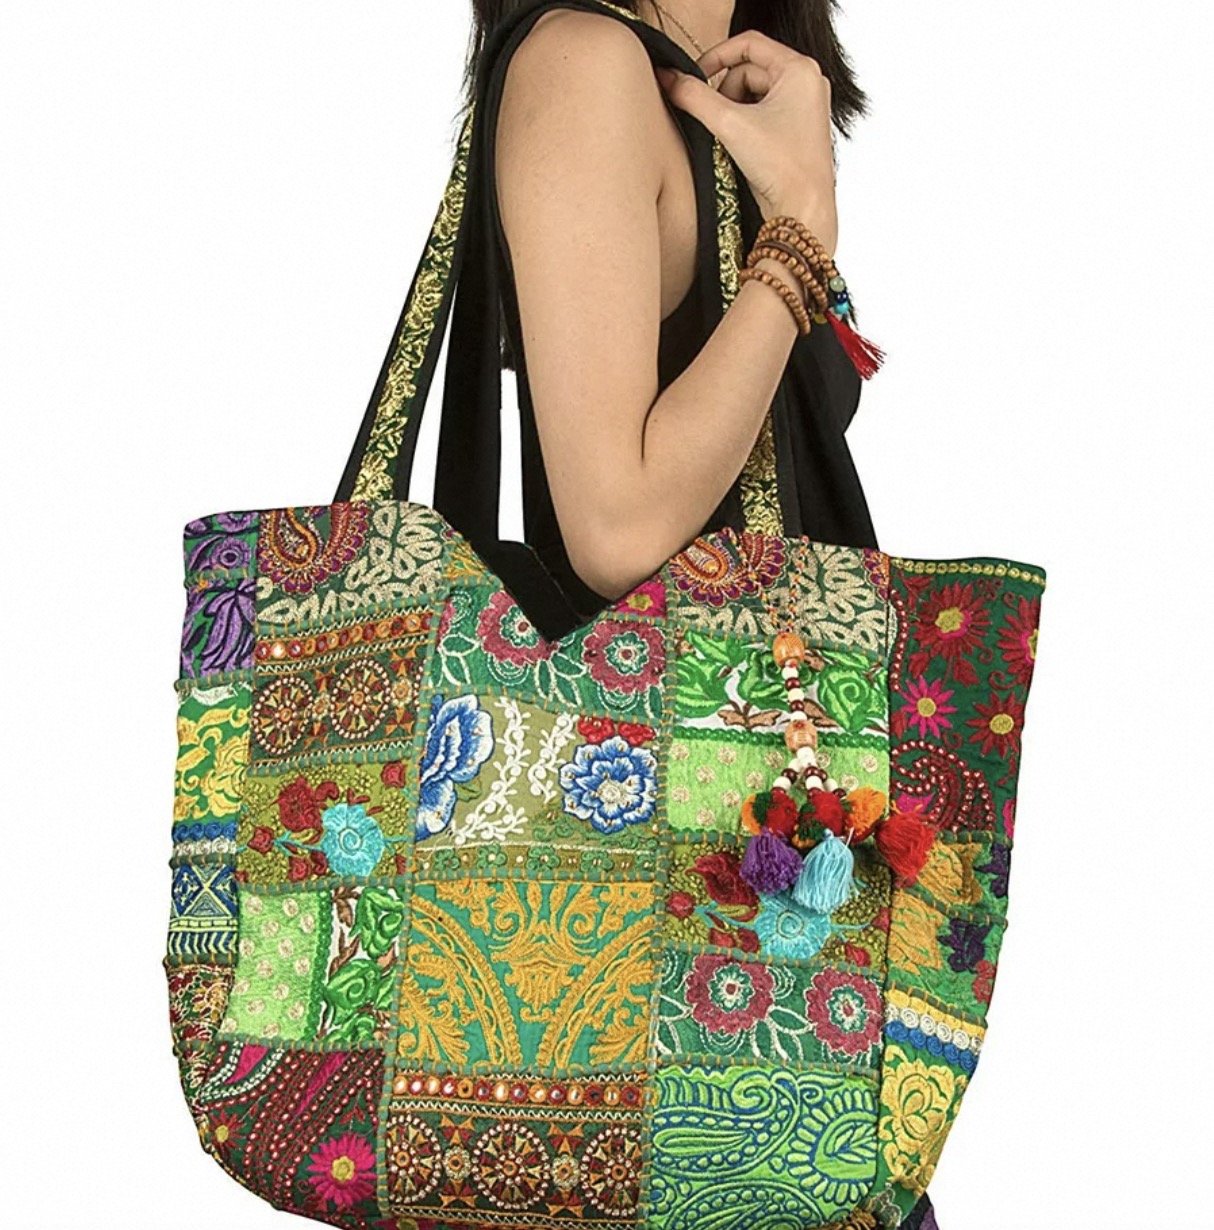 women's tote bags for school